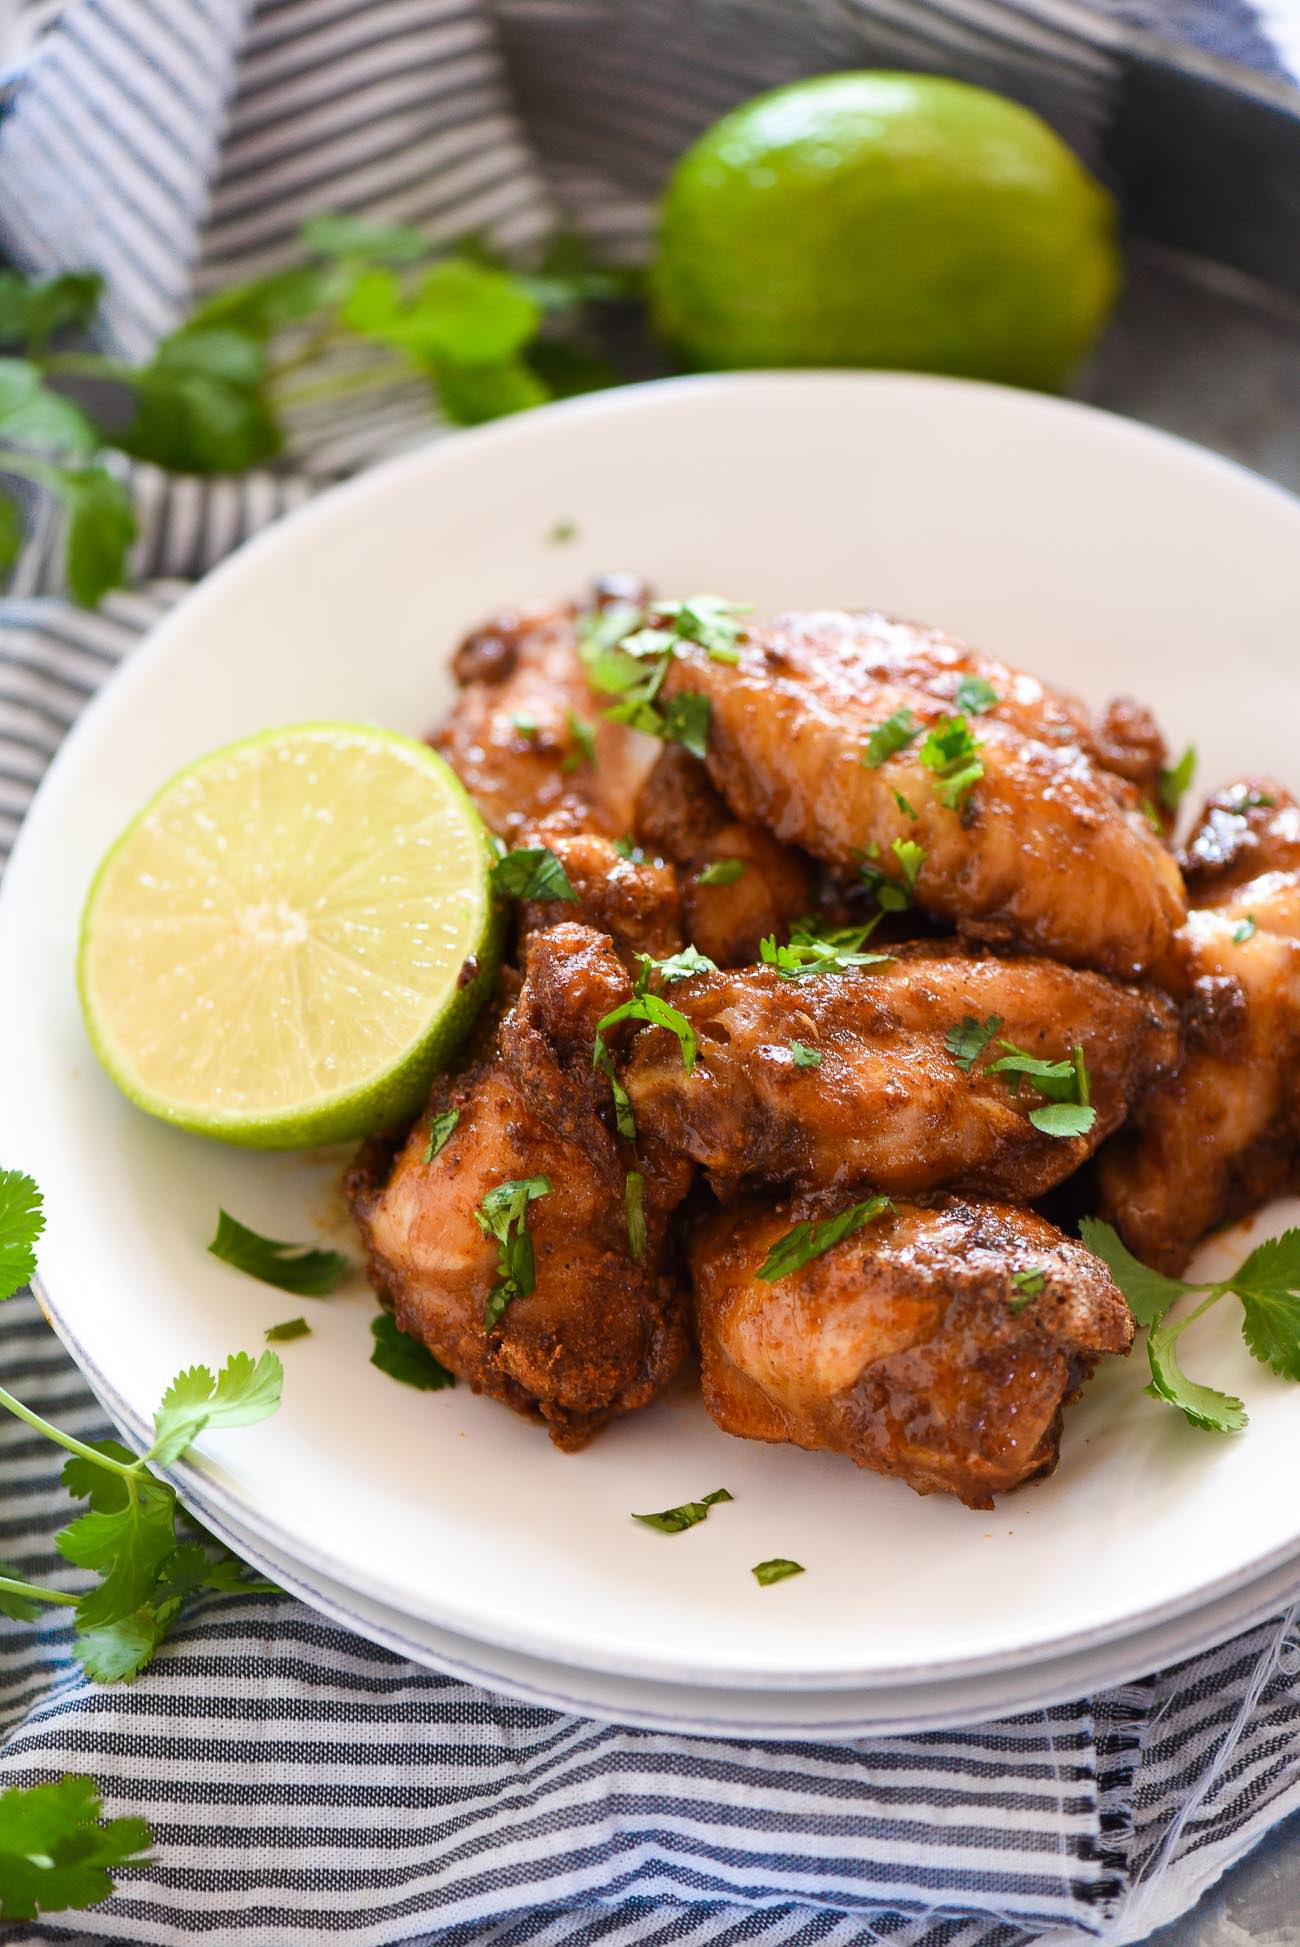 Honey Chipotle Crispy Baked Wings are an easy and healthy game dish! They are coated in a spicy chipotle rub, baked to crispy perfection then smothered in a honey lime sauce! 